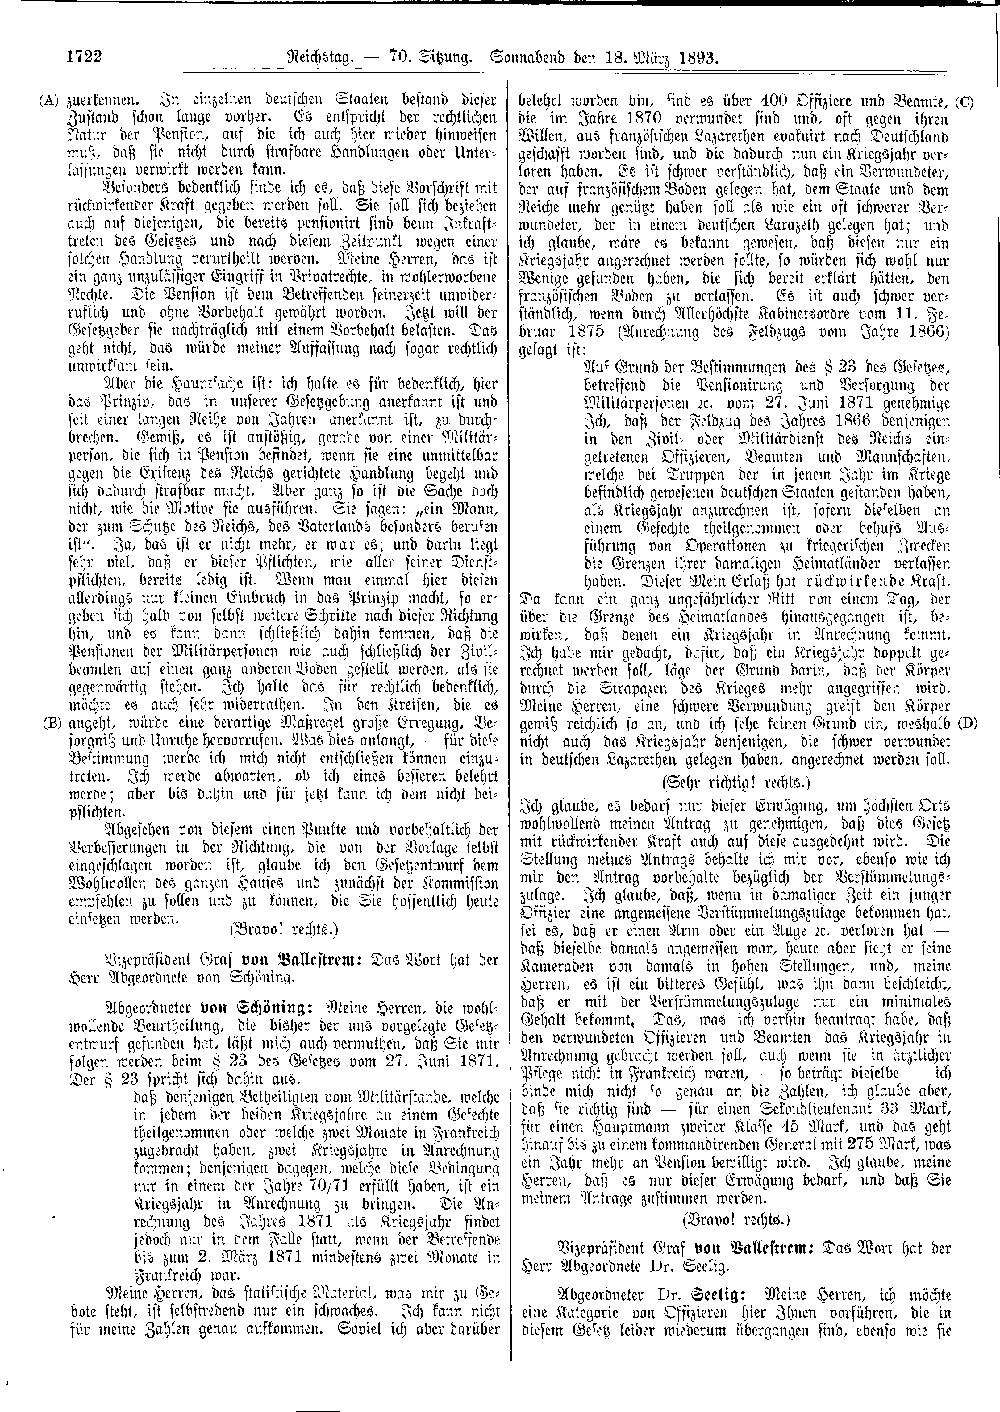 Scan of page 1722